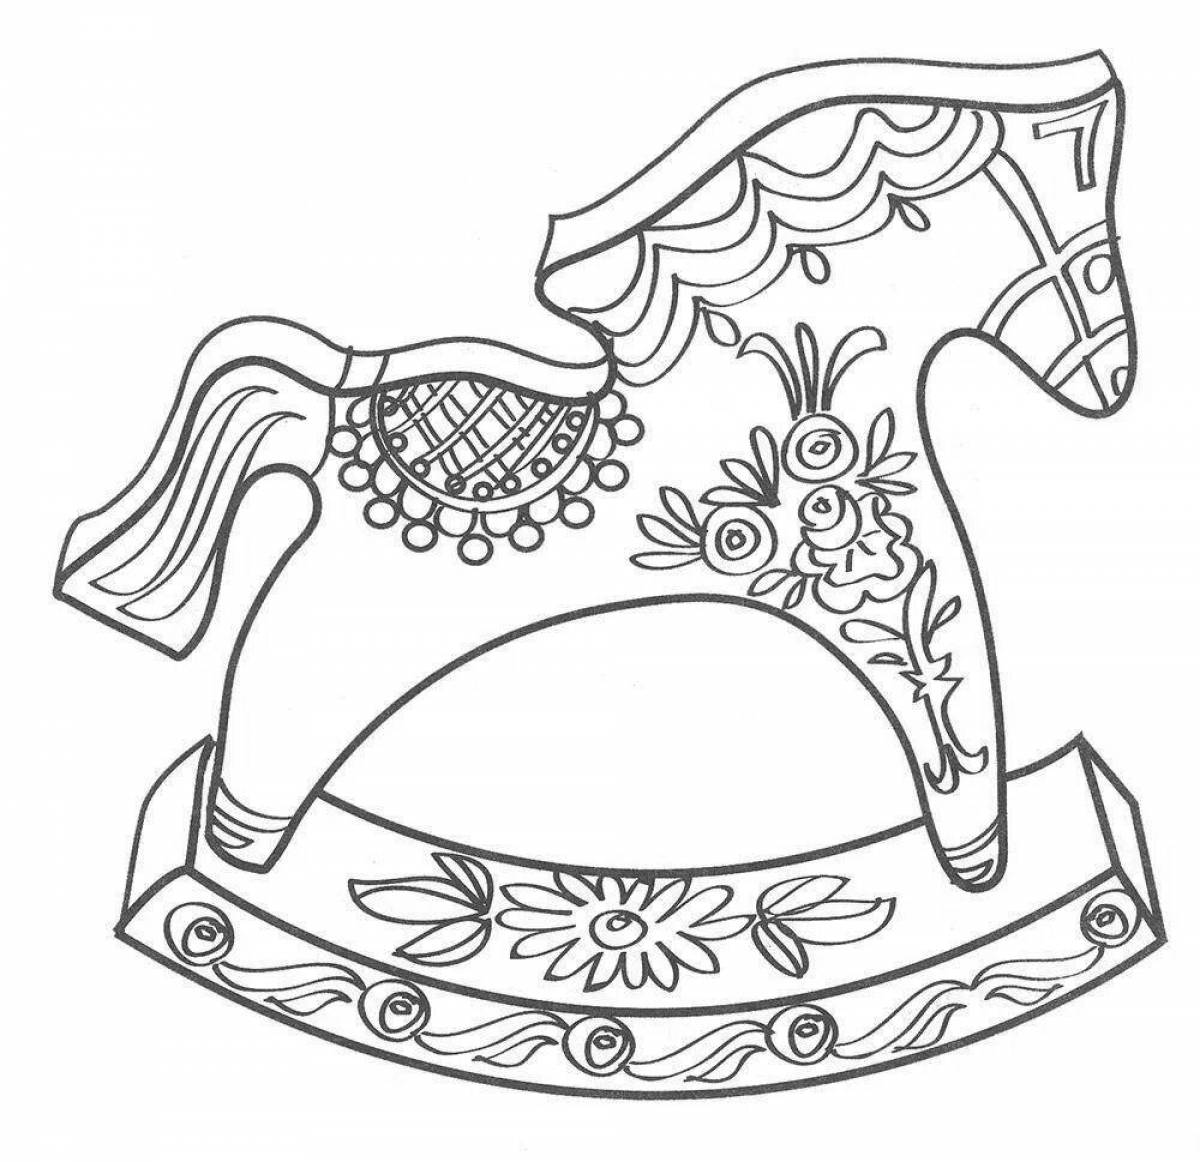 Adorable rocking horse coloring book for kids